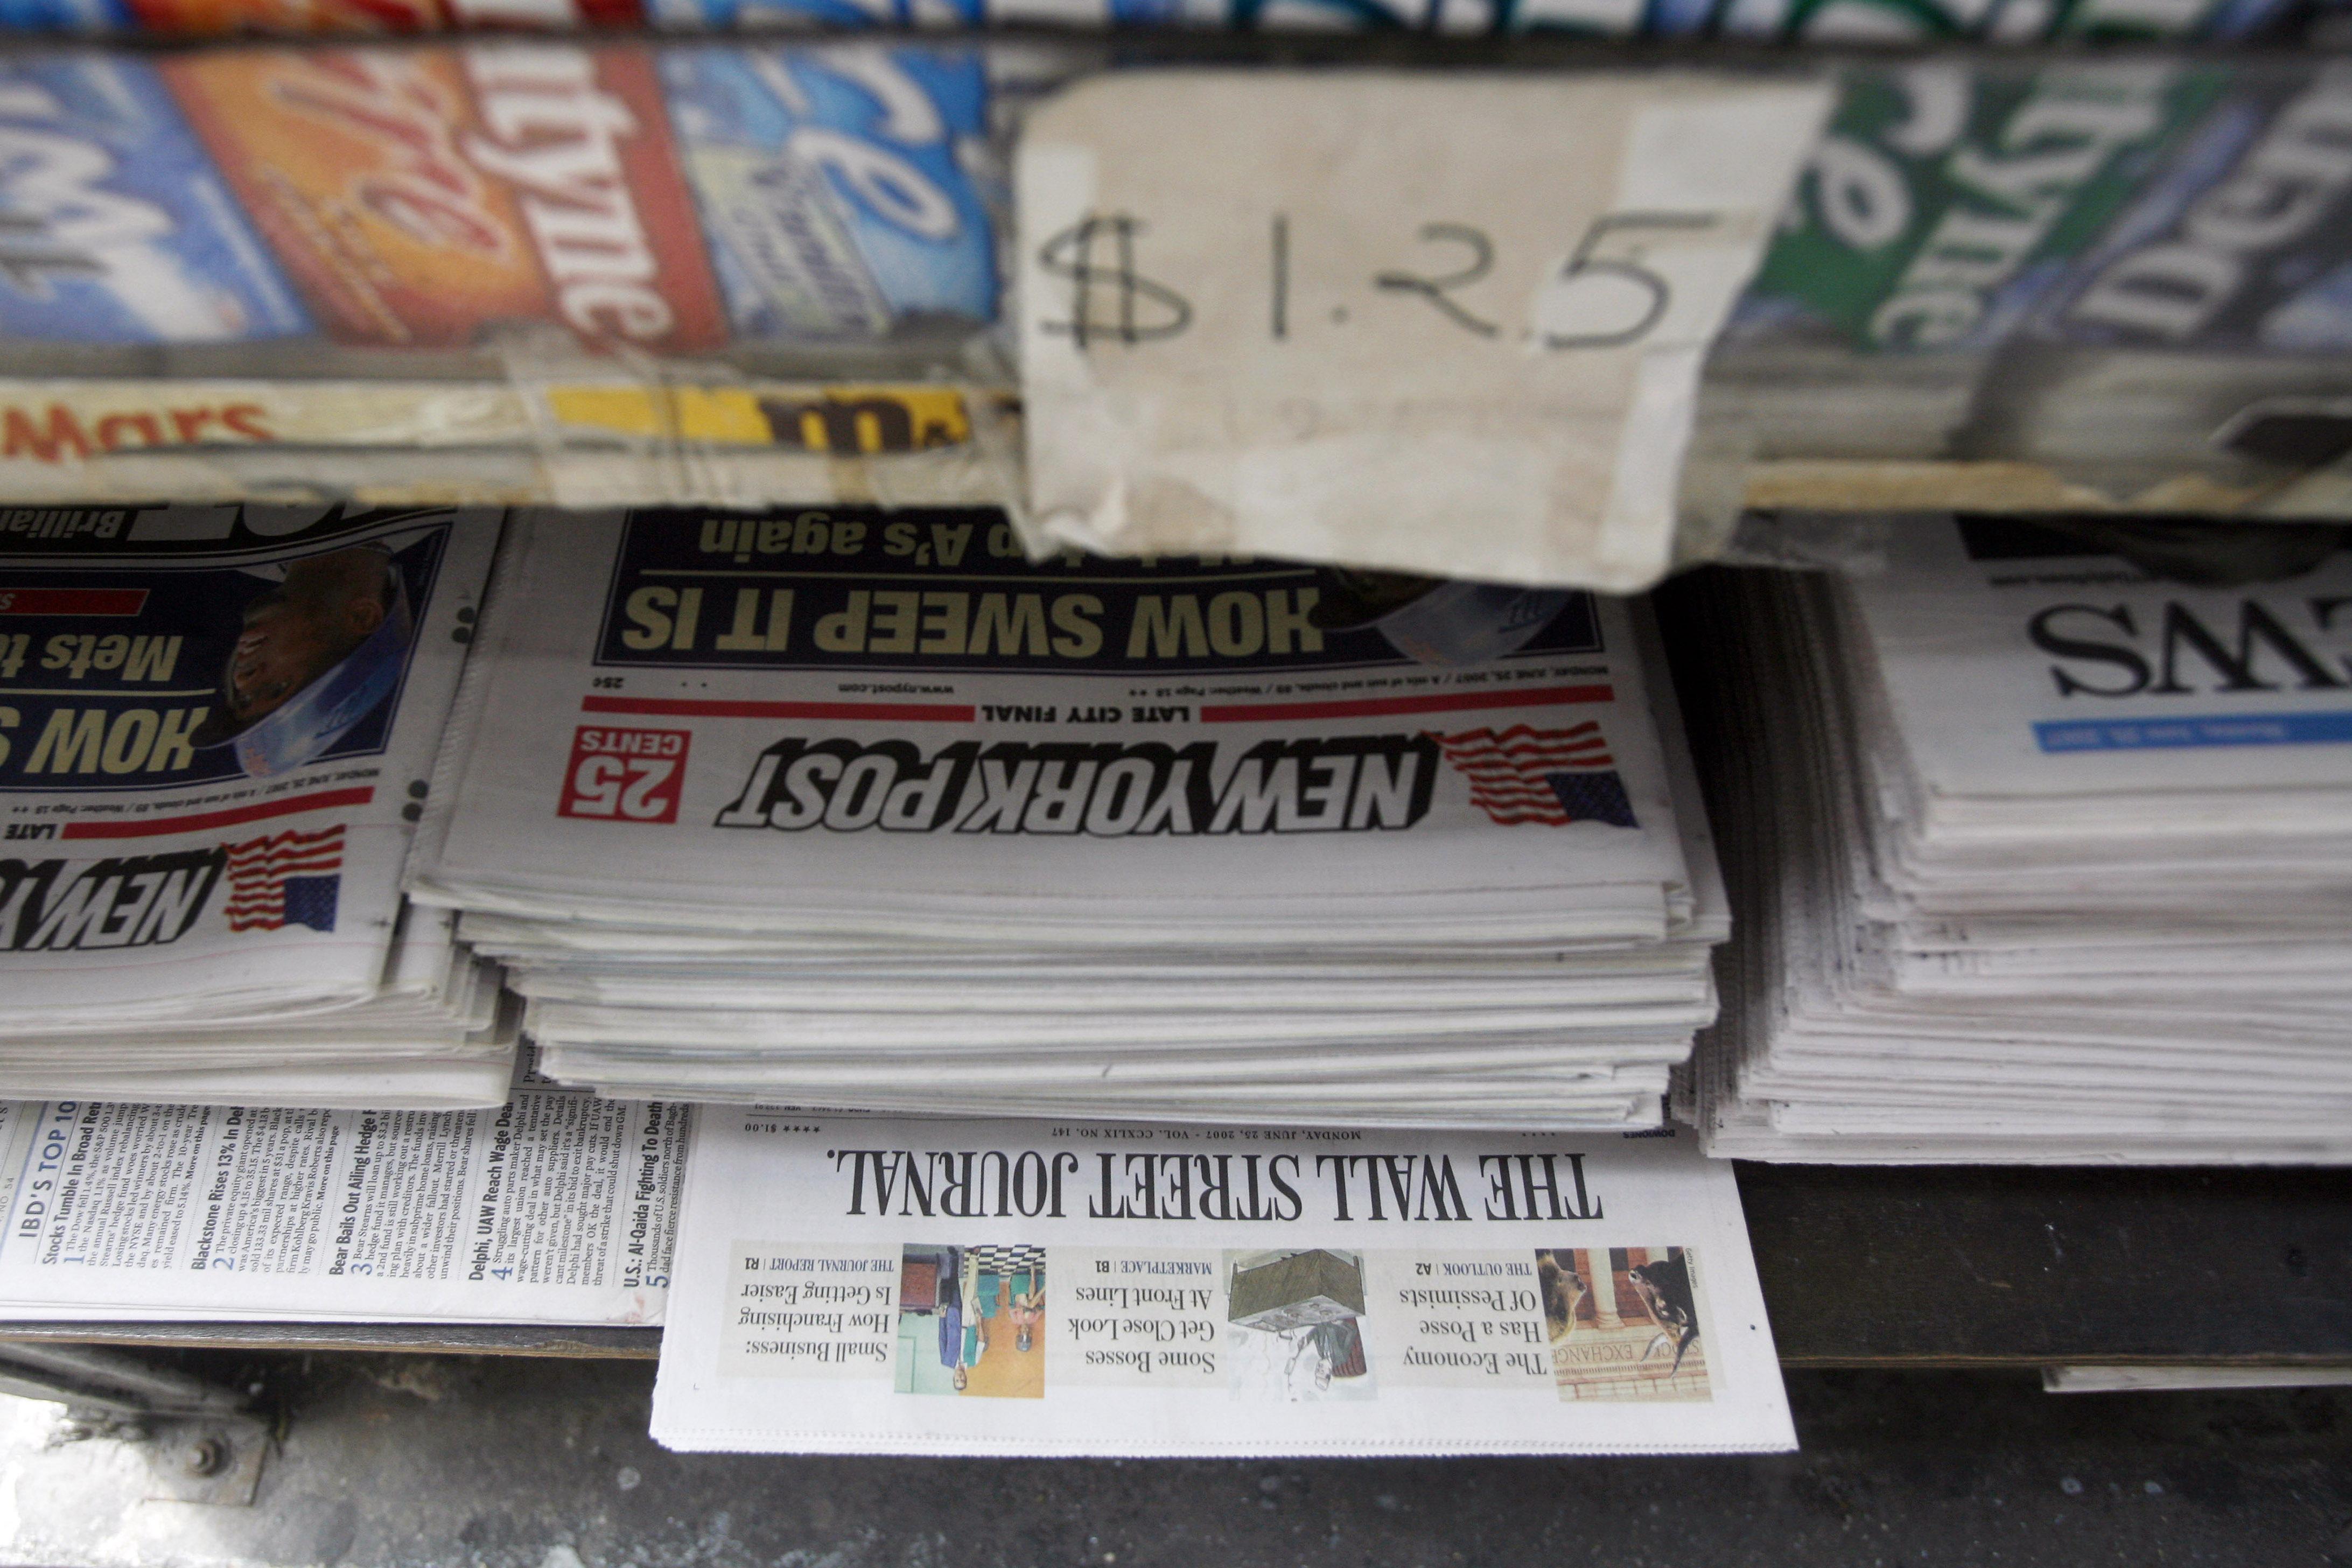 Copies of the New York Post sit on display at a newsstand.